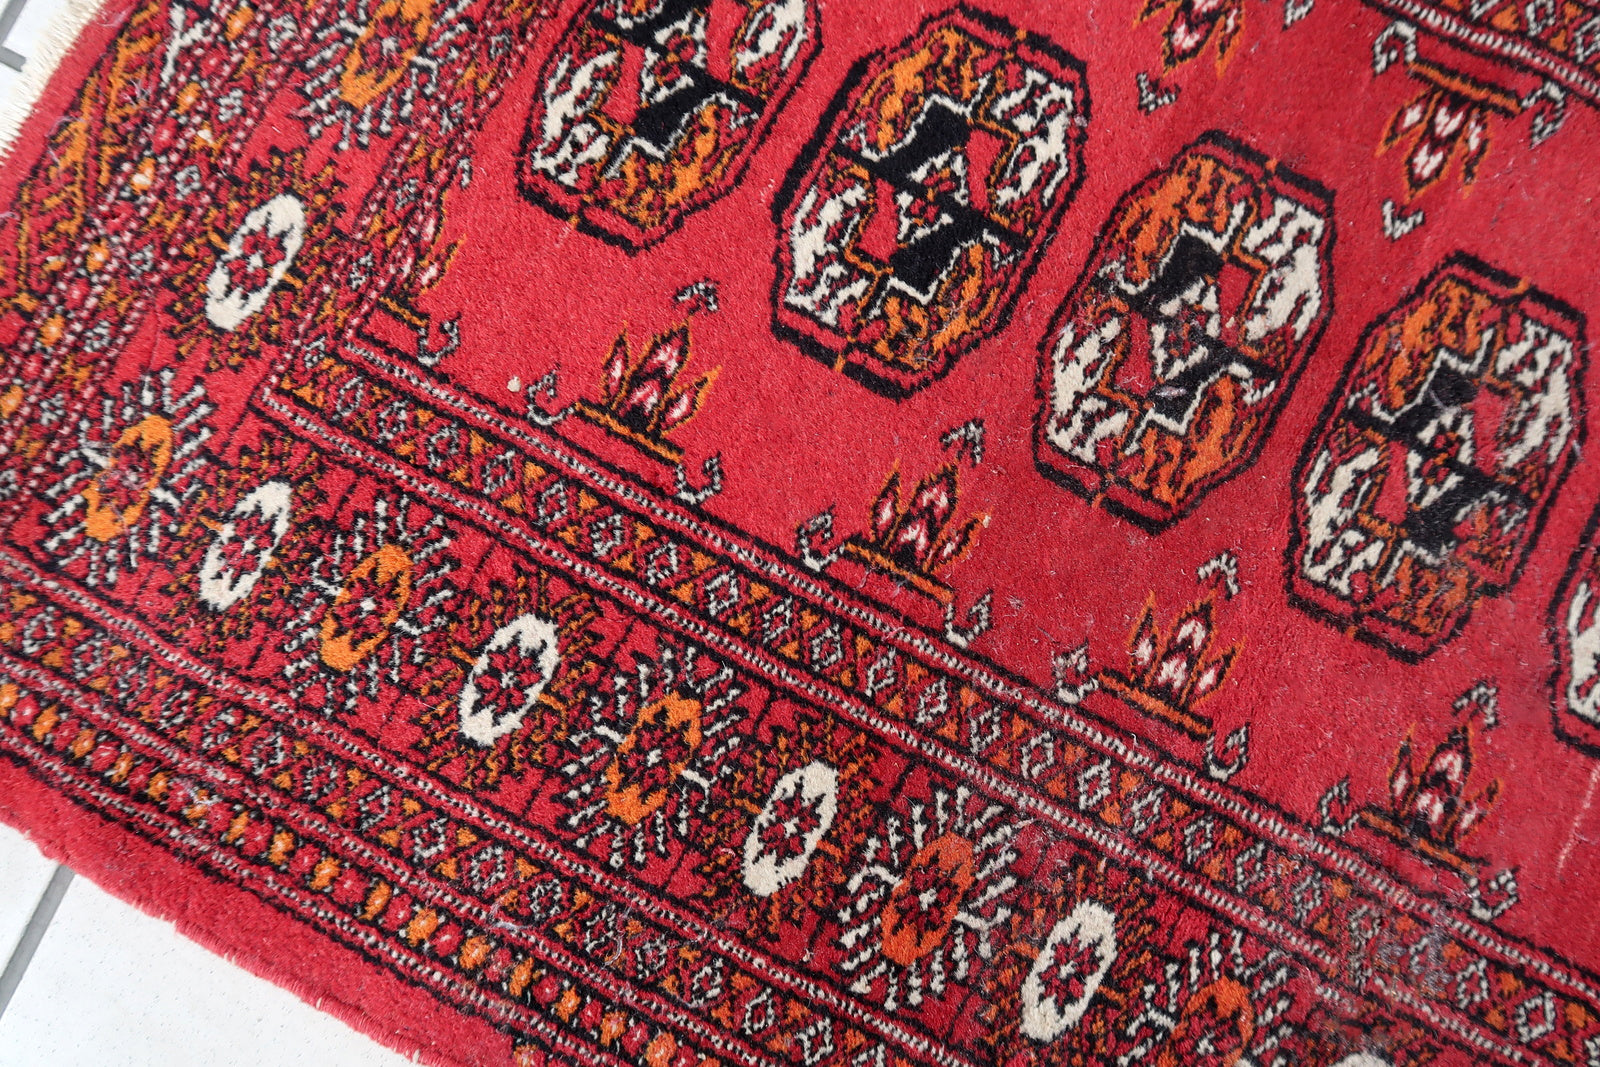 Handmade vintage Uzbek Bukhara rug in traditional design and red wool. The rug is from the end of 20th century. It is in original condition, has some low pile.